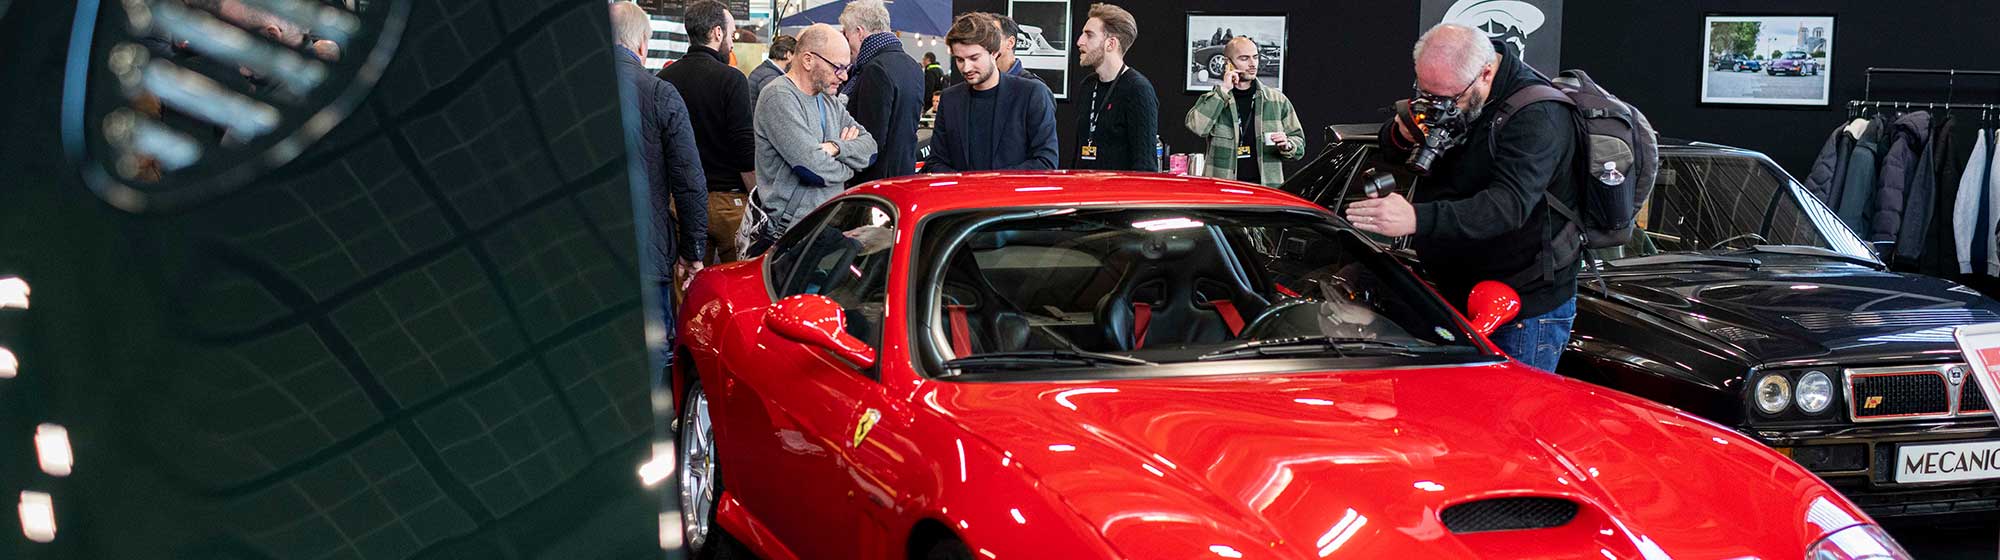 Group of men admiring a red car on a stand at Rétromobile